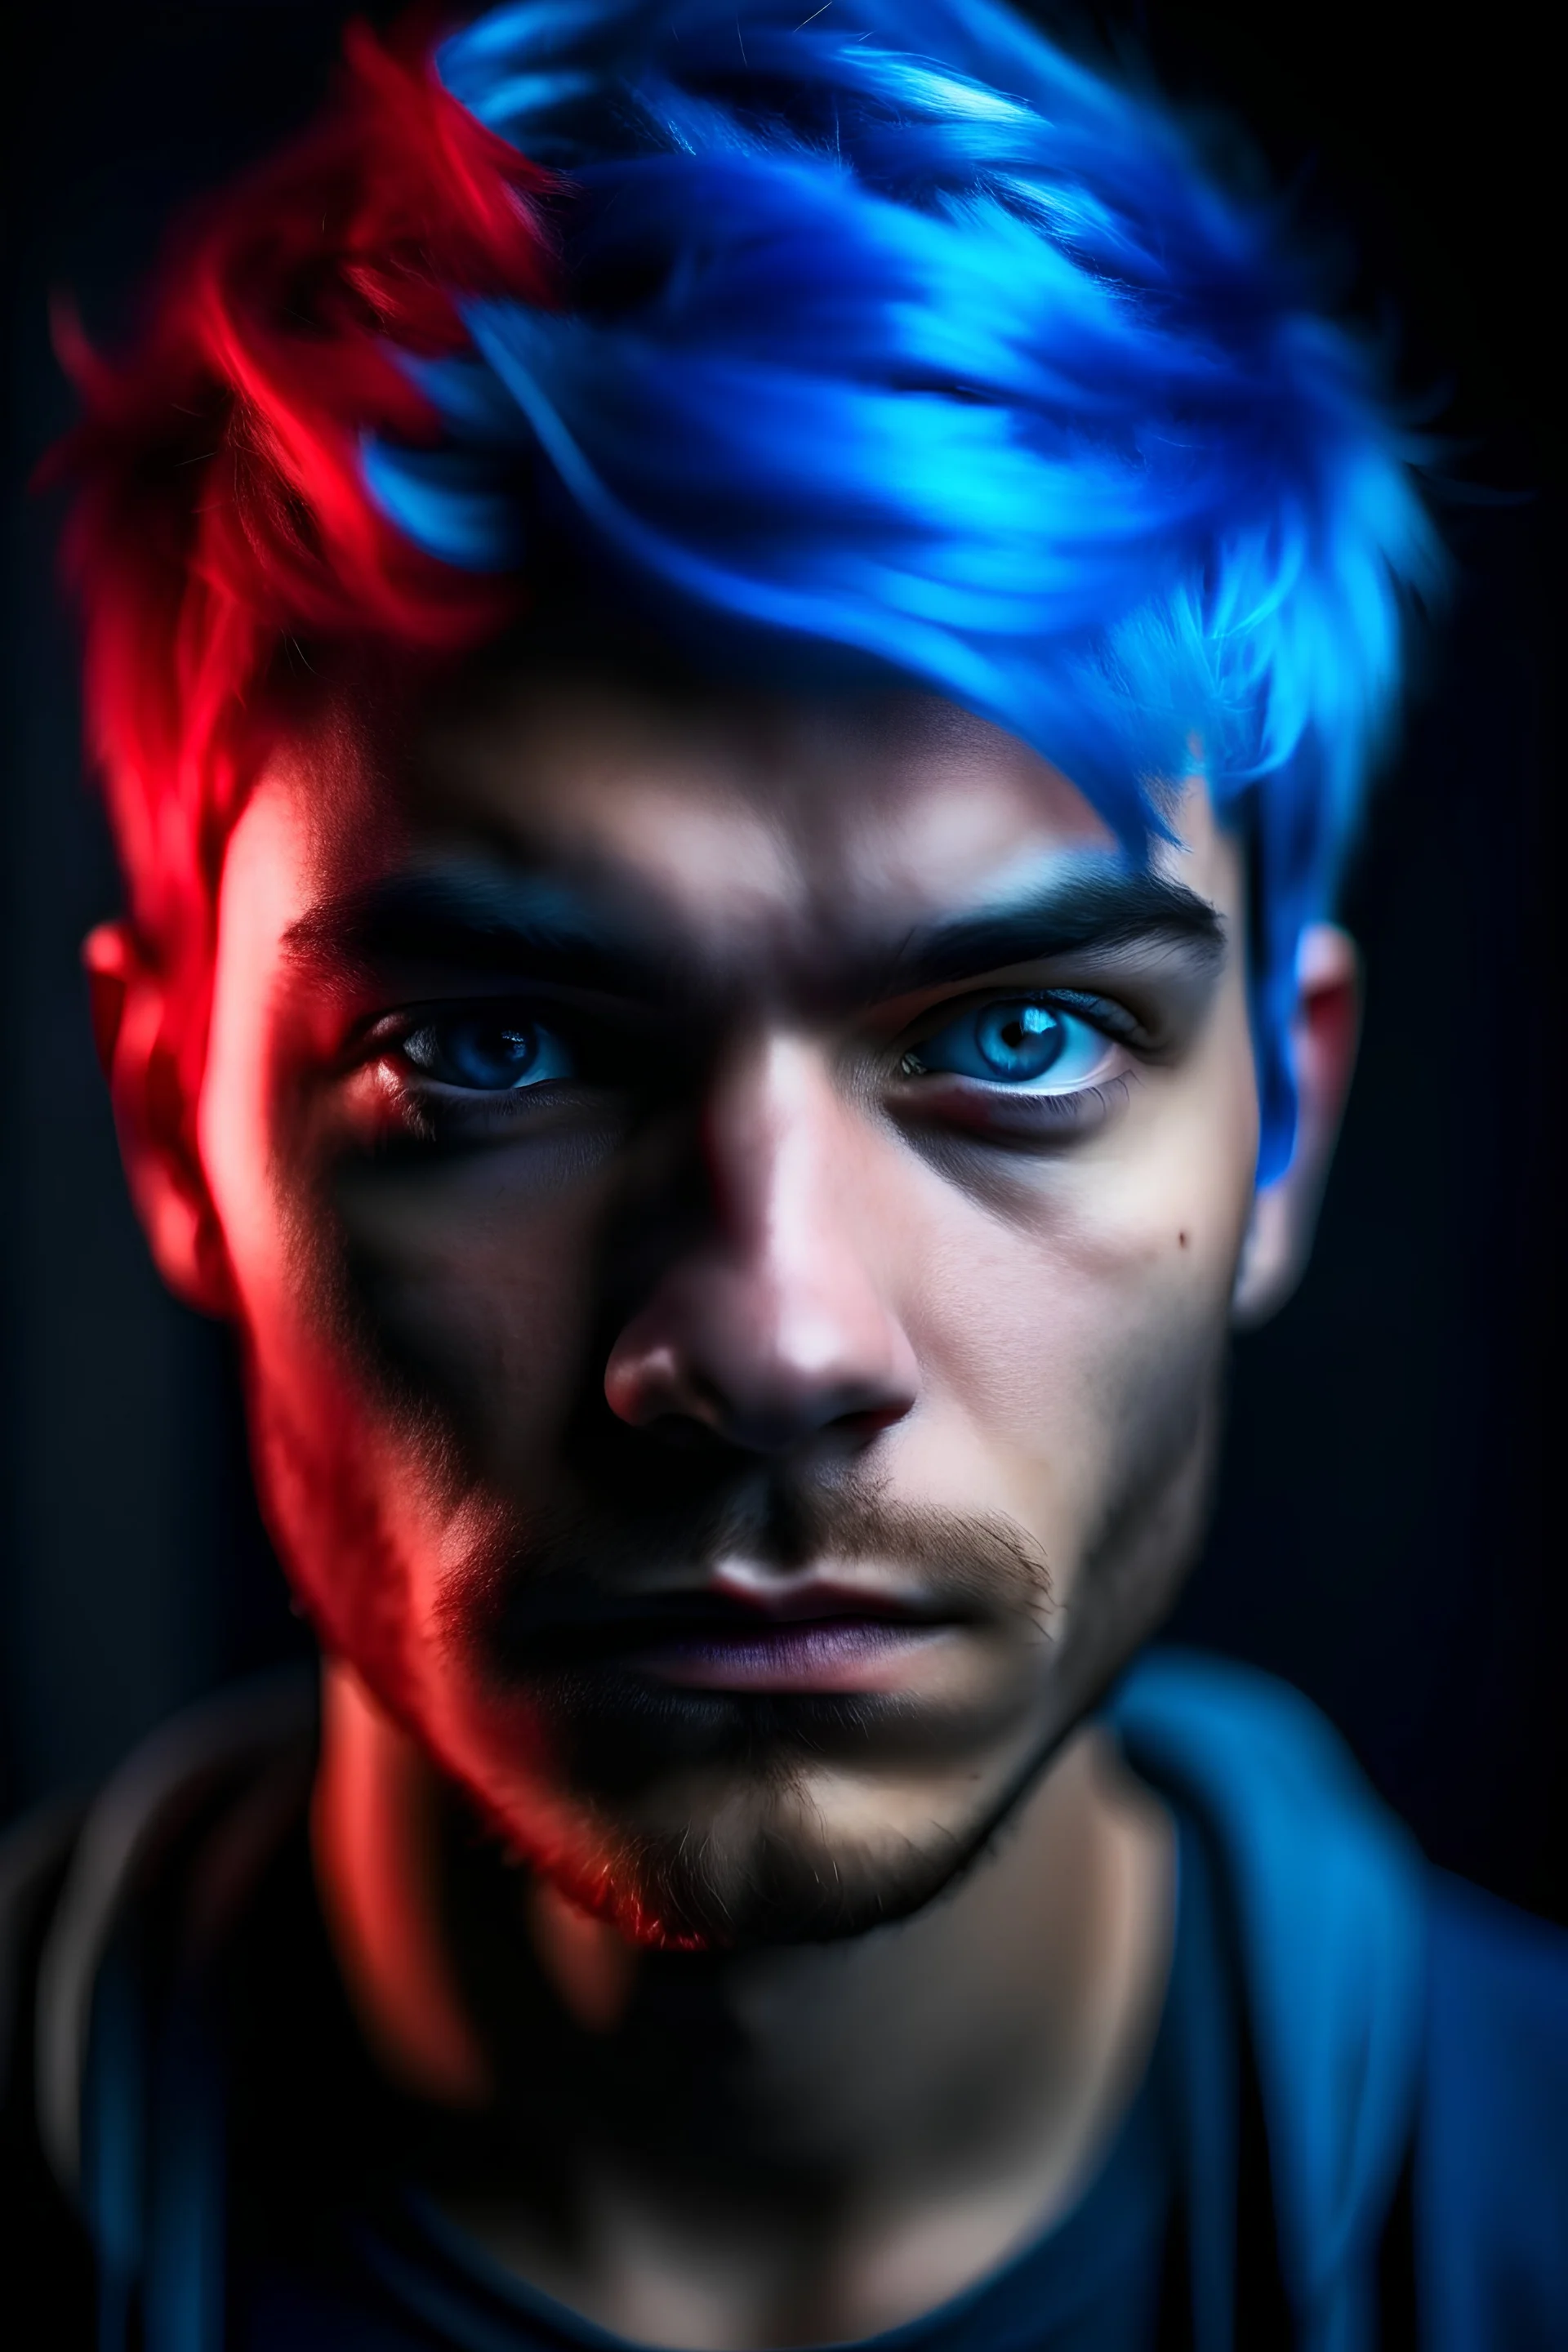 A man with blue hair and red eyes